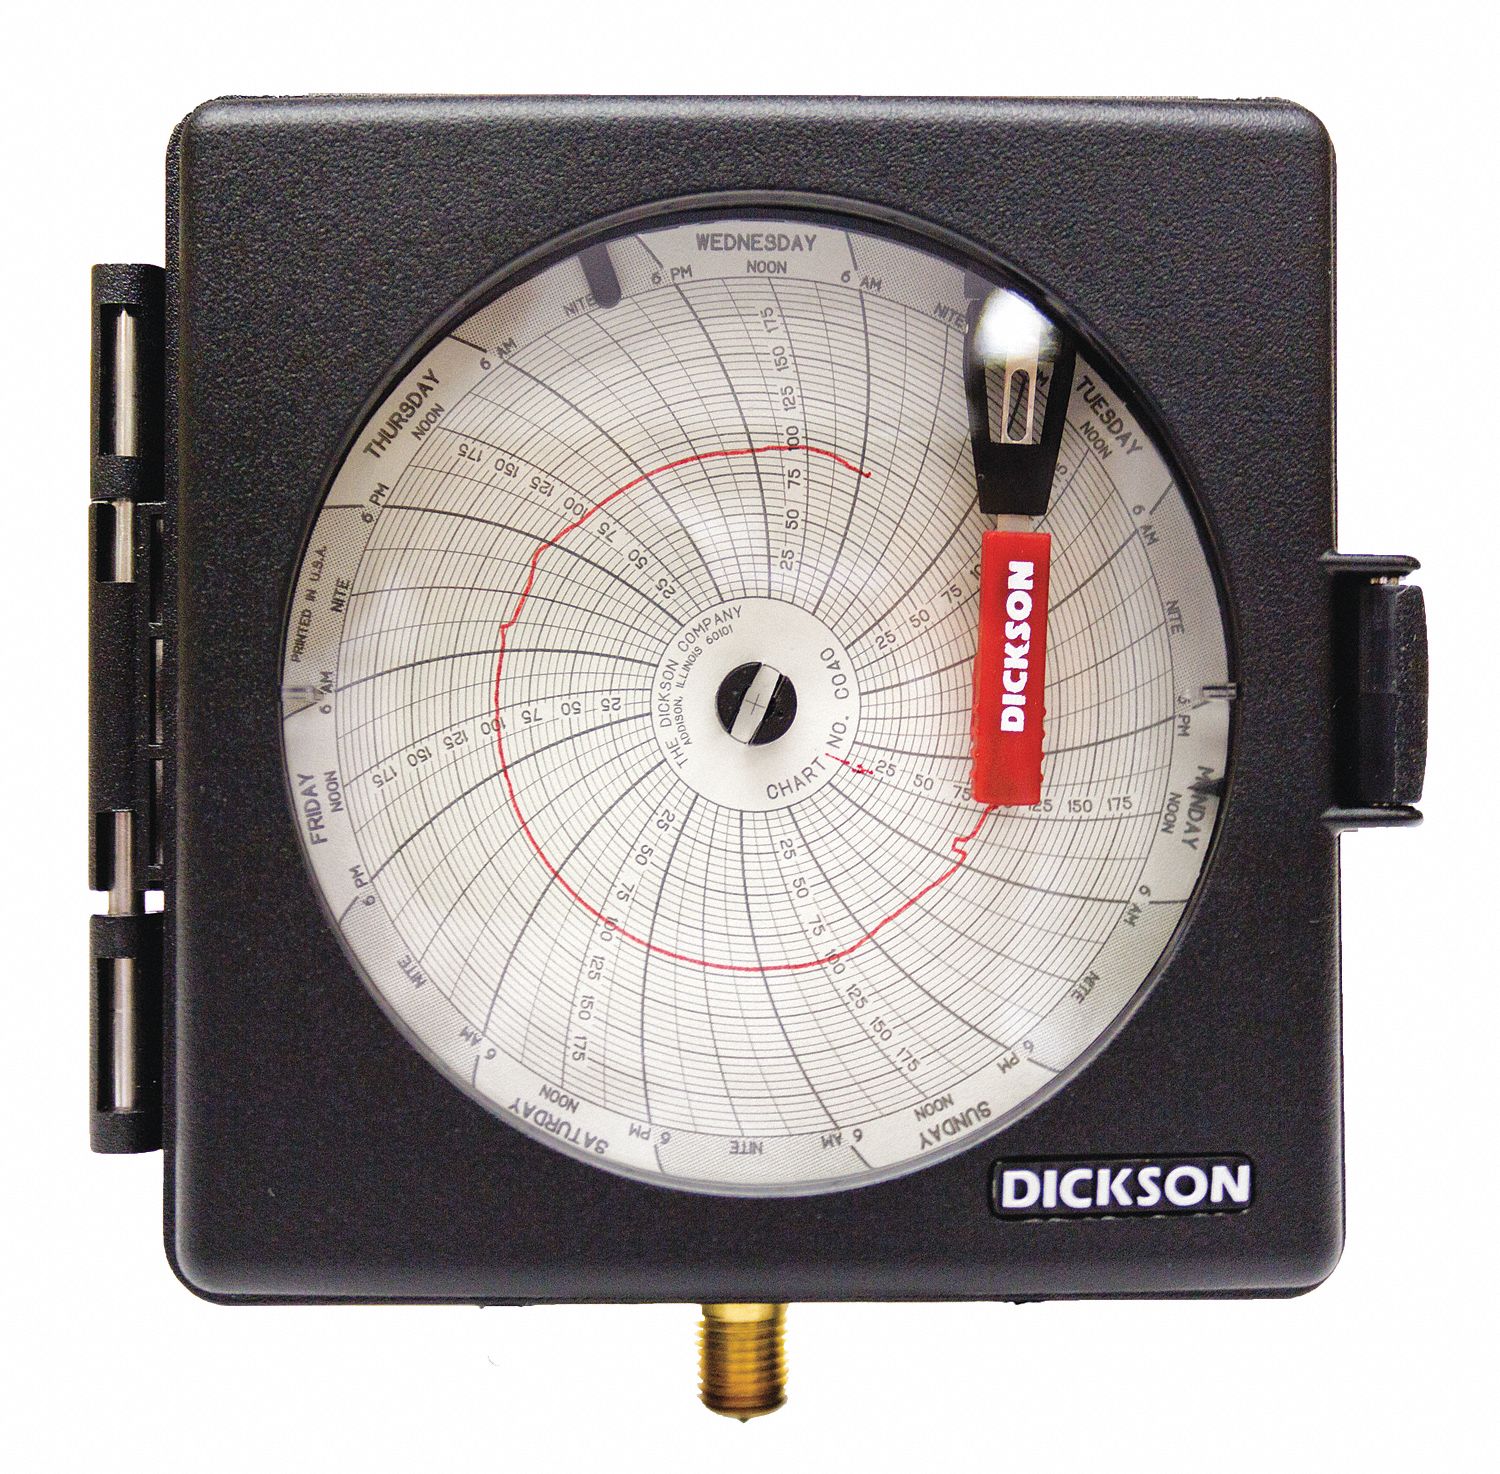 DICKSON Chart Recorder, 0 to 100 PSI 16A179PW470 Grainger